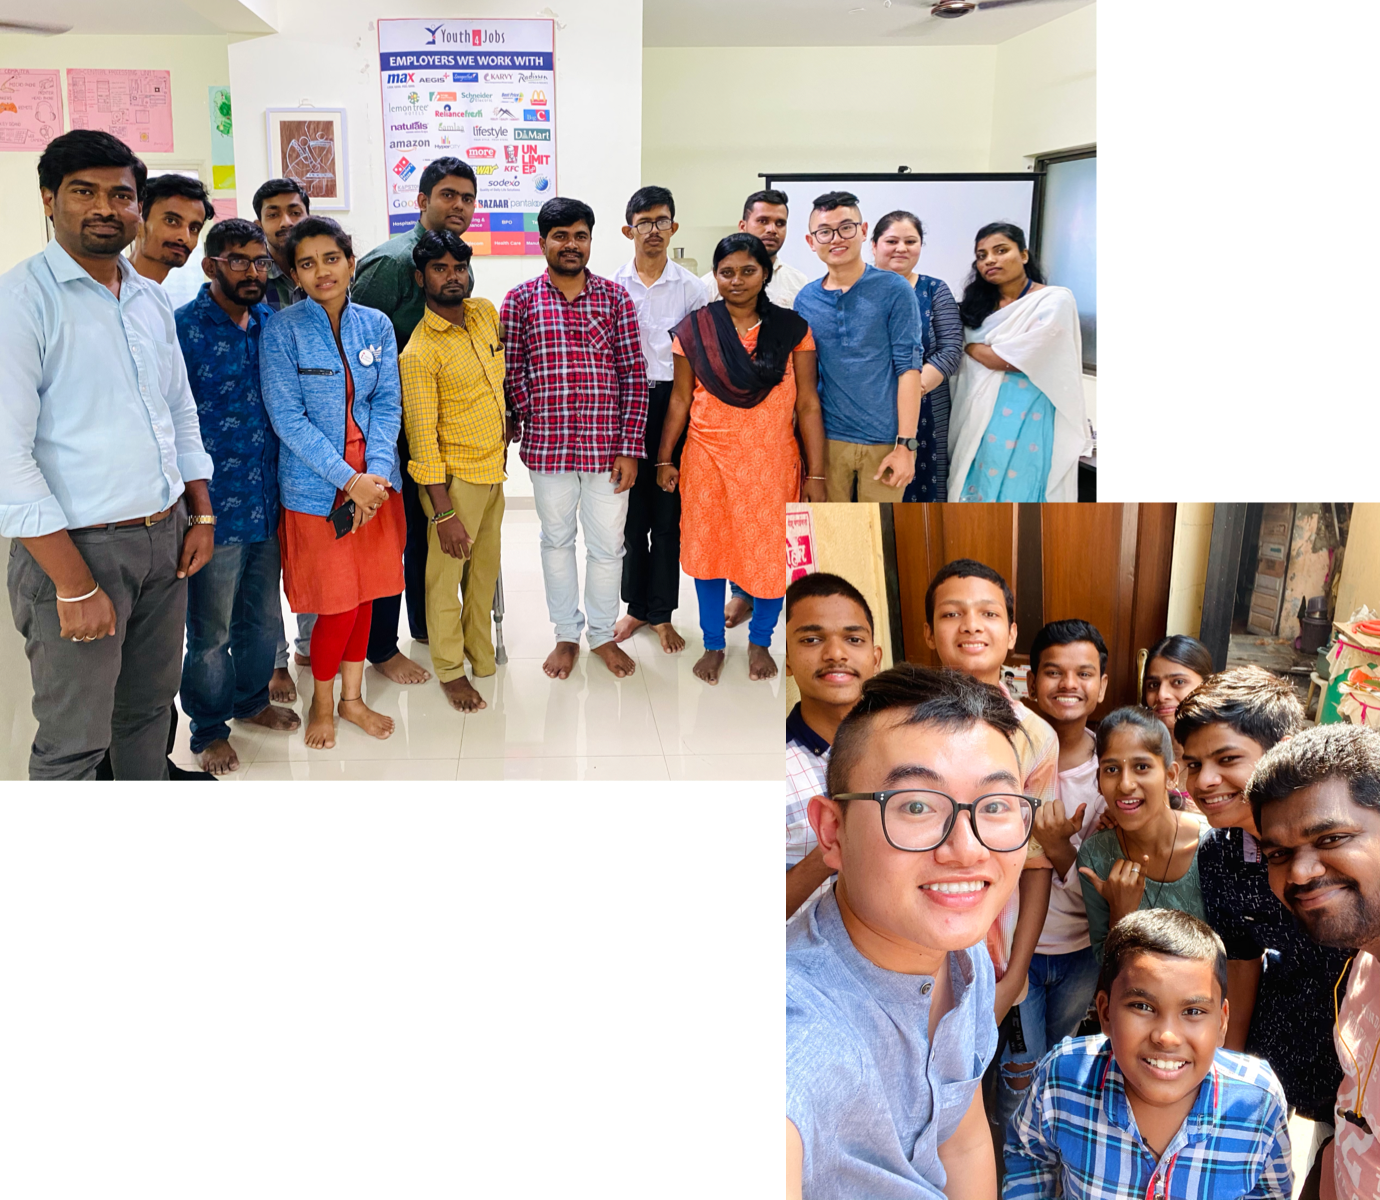 Collage of 2 pictures of ace and people he met in India. First picture he is standing with a group of people at the disability center. Second picture he is taking a selfie with kids at the learning center